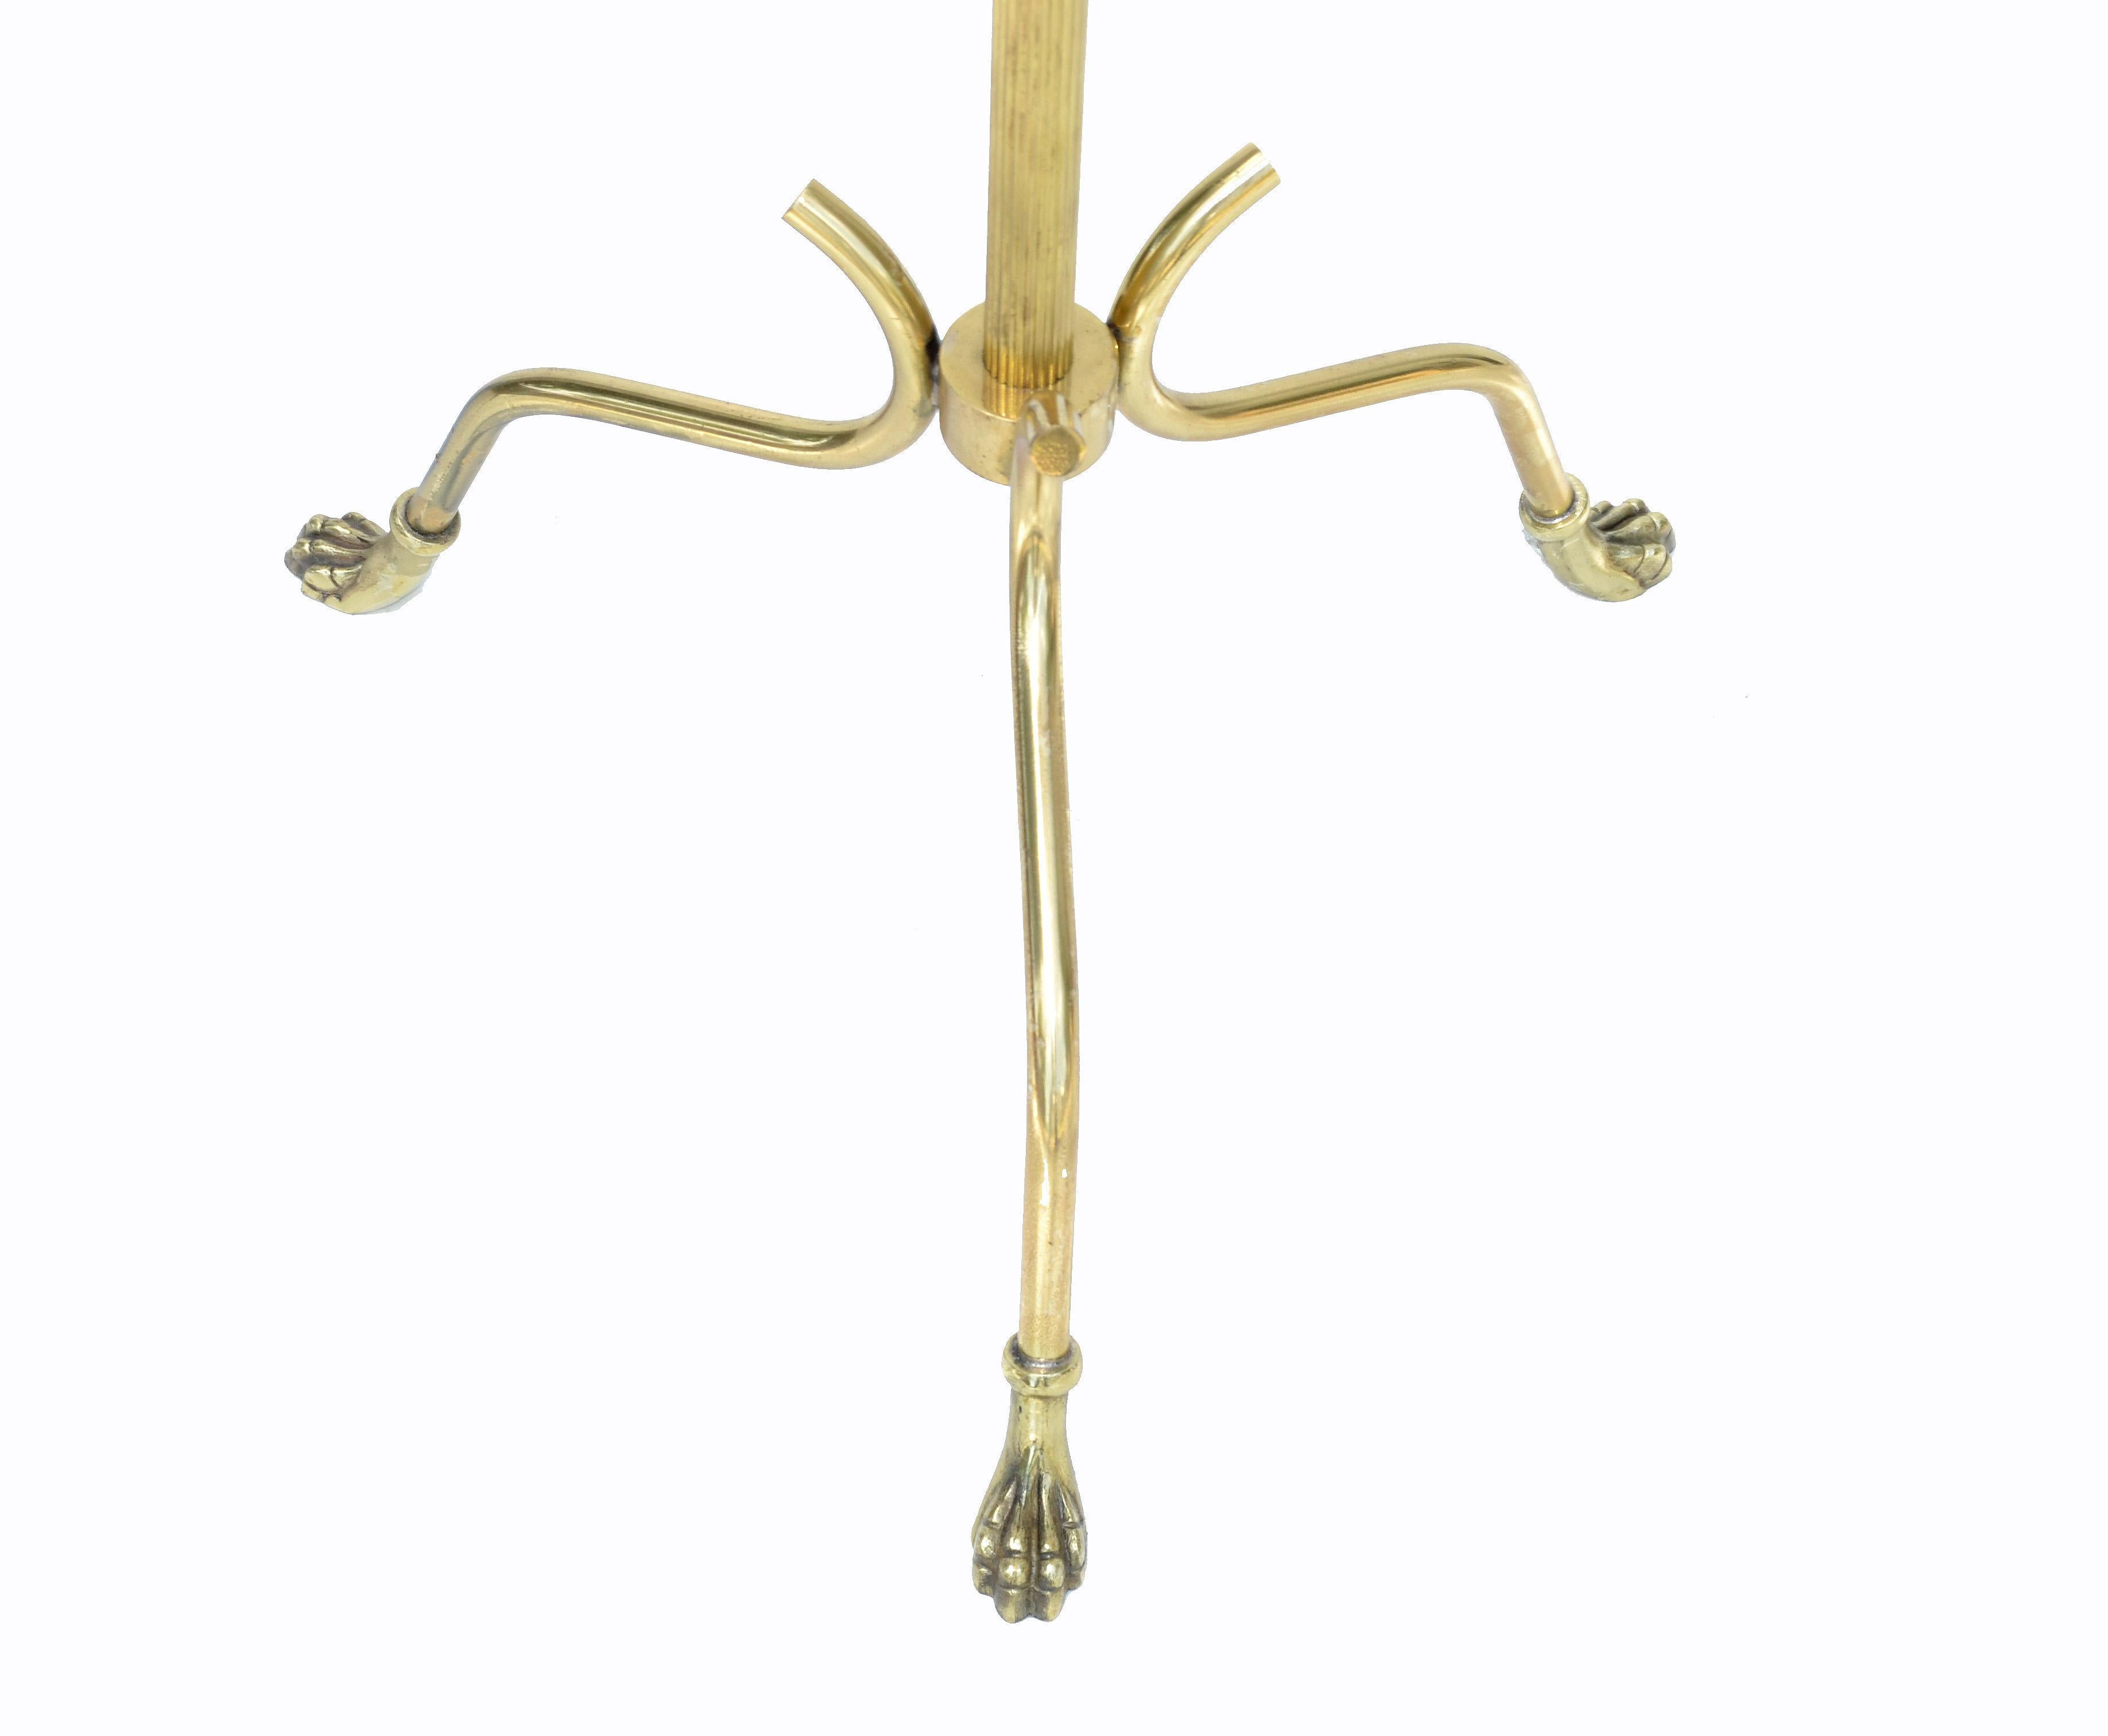 Maison Jansen French Provincial Bronze Claw Feet Floor Lamp For Sale 2